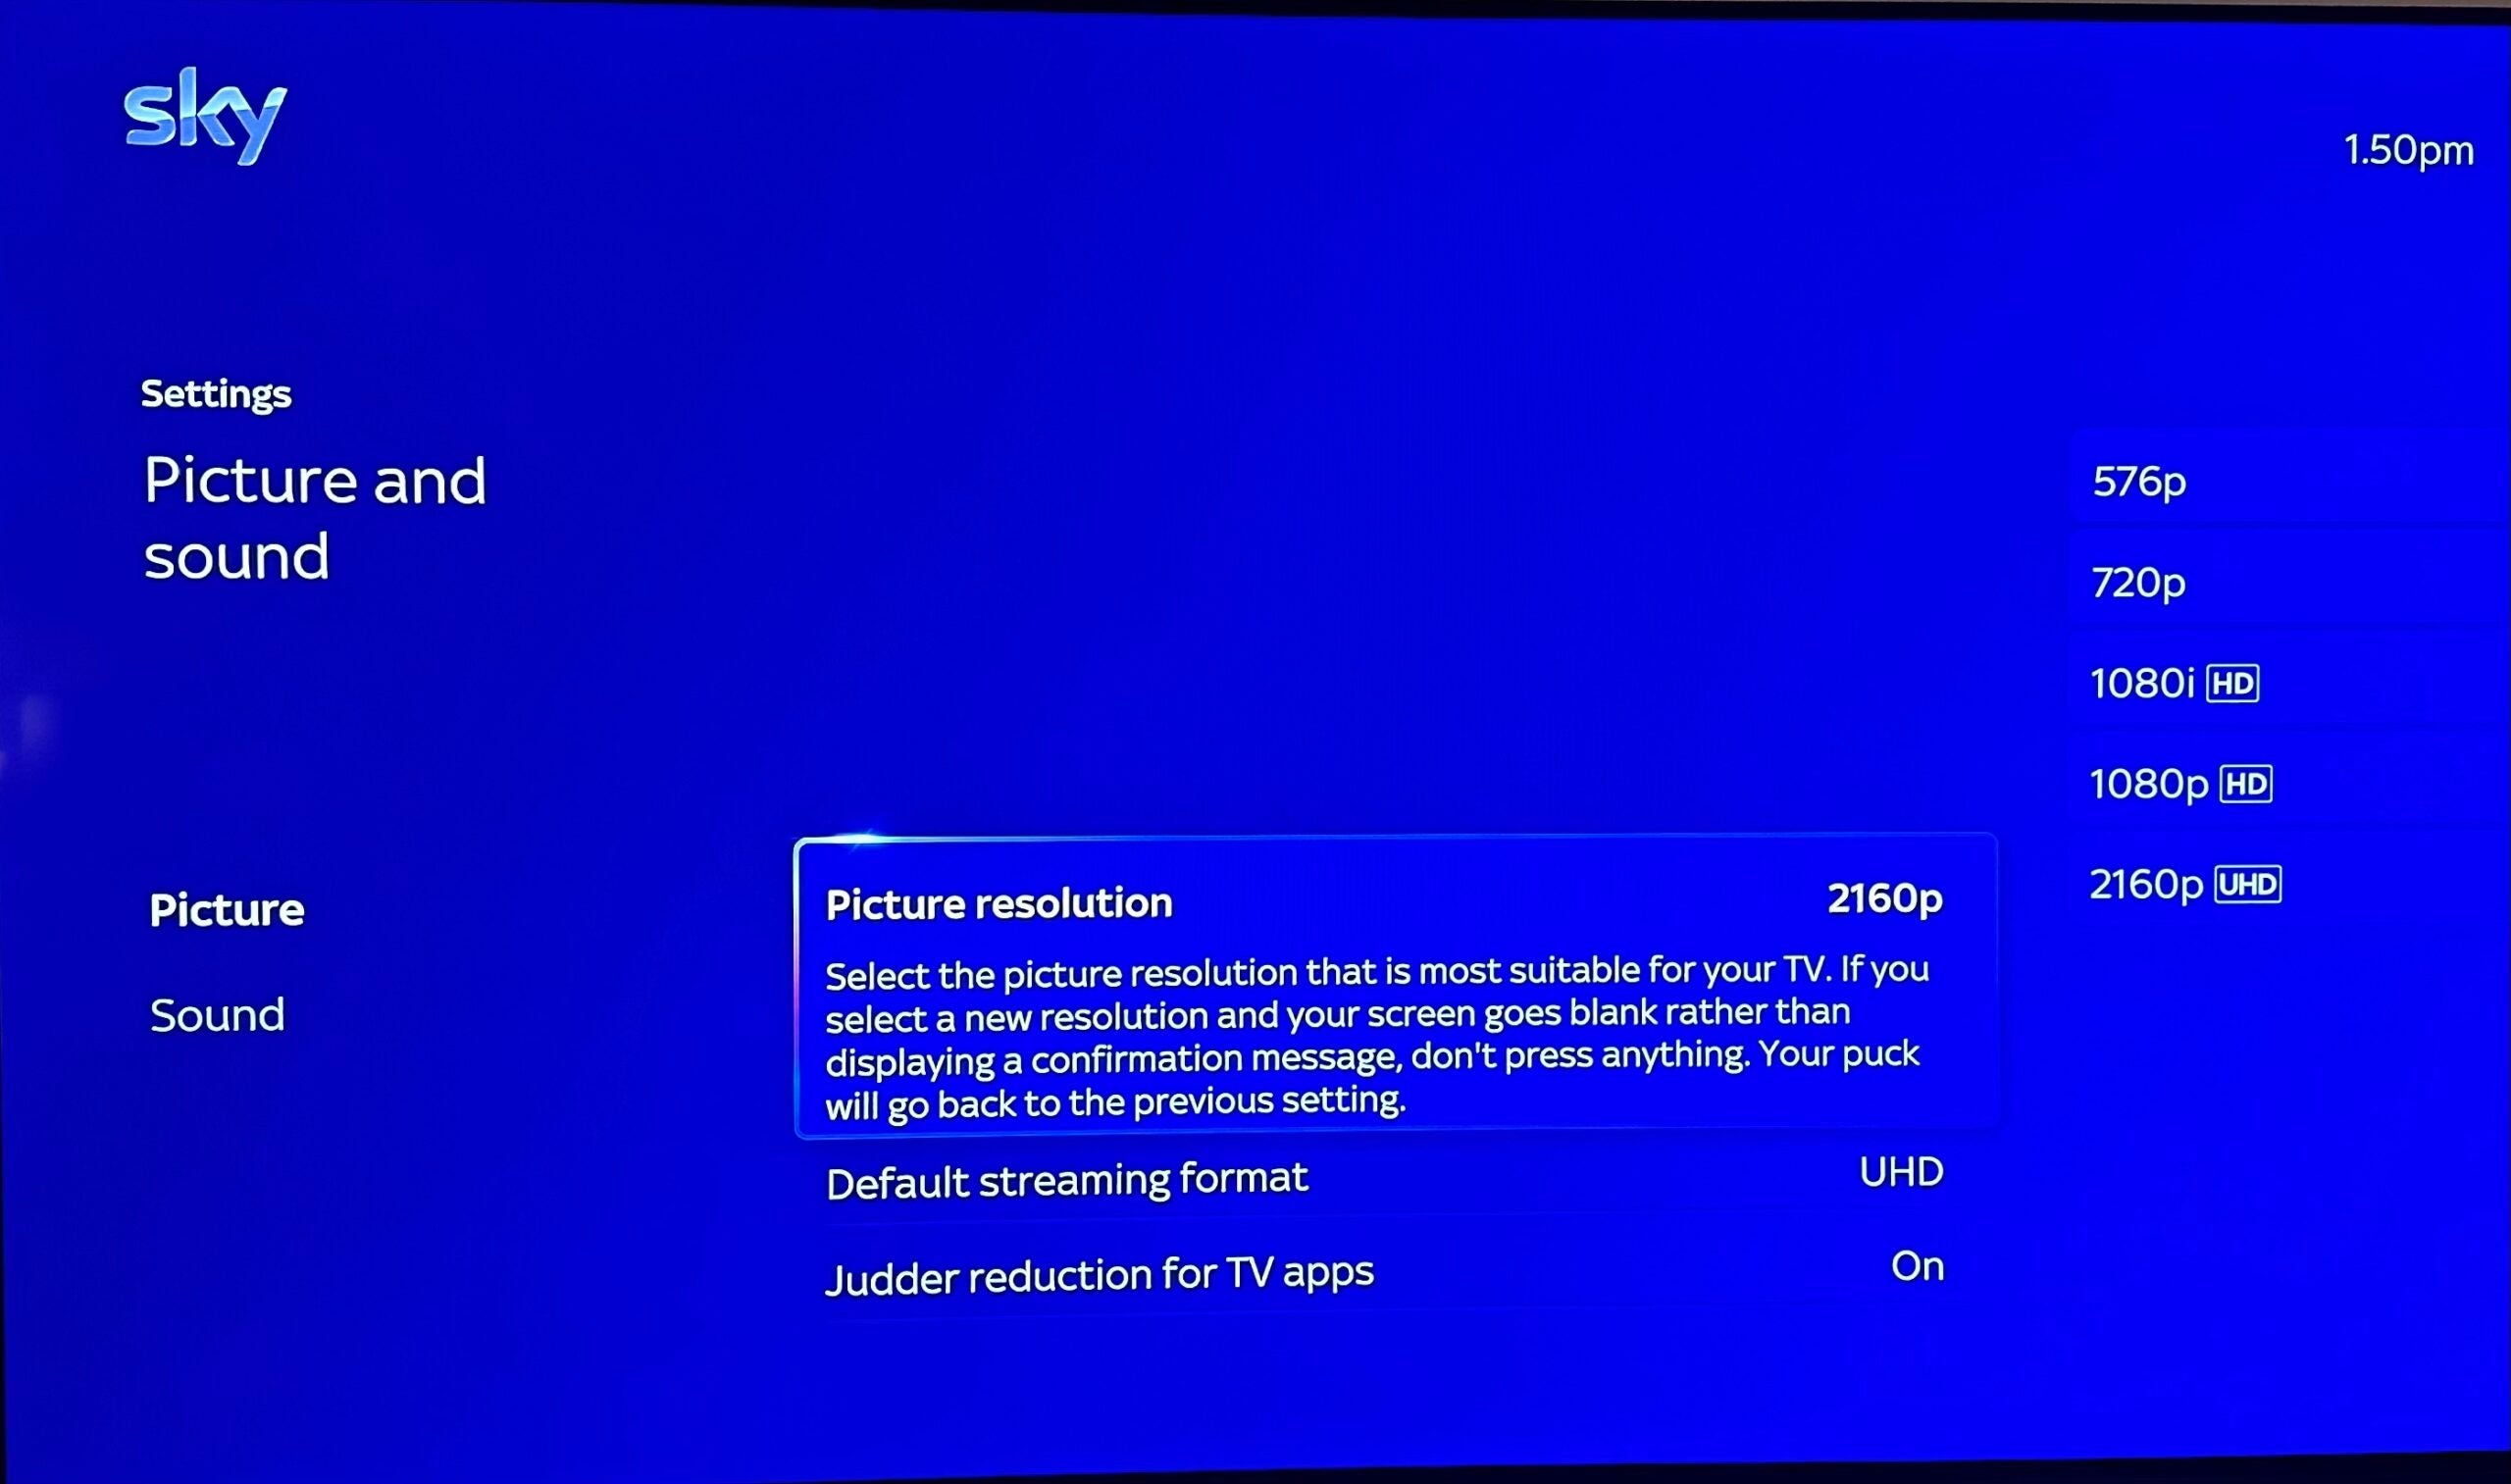 How to change the video resolution on Sky Stream